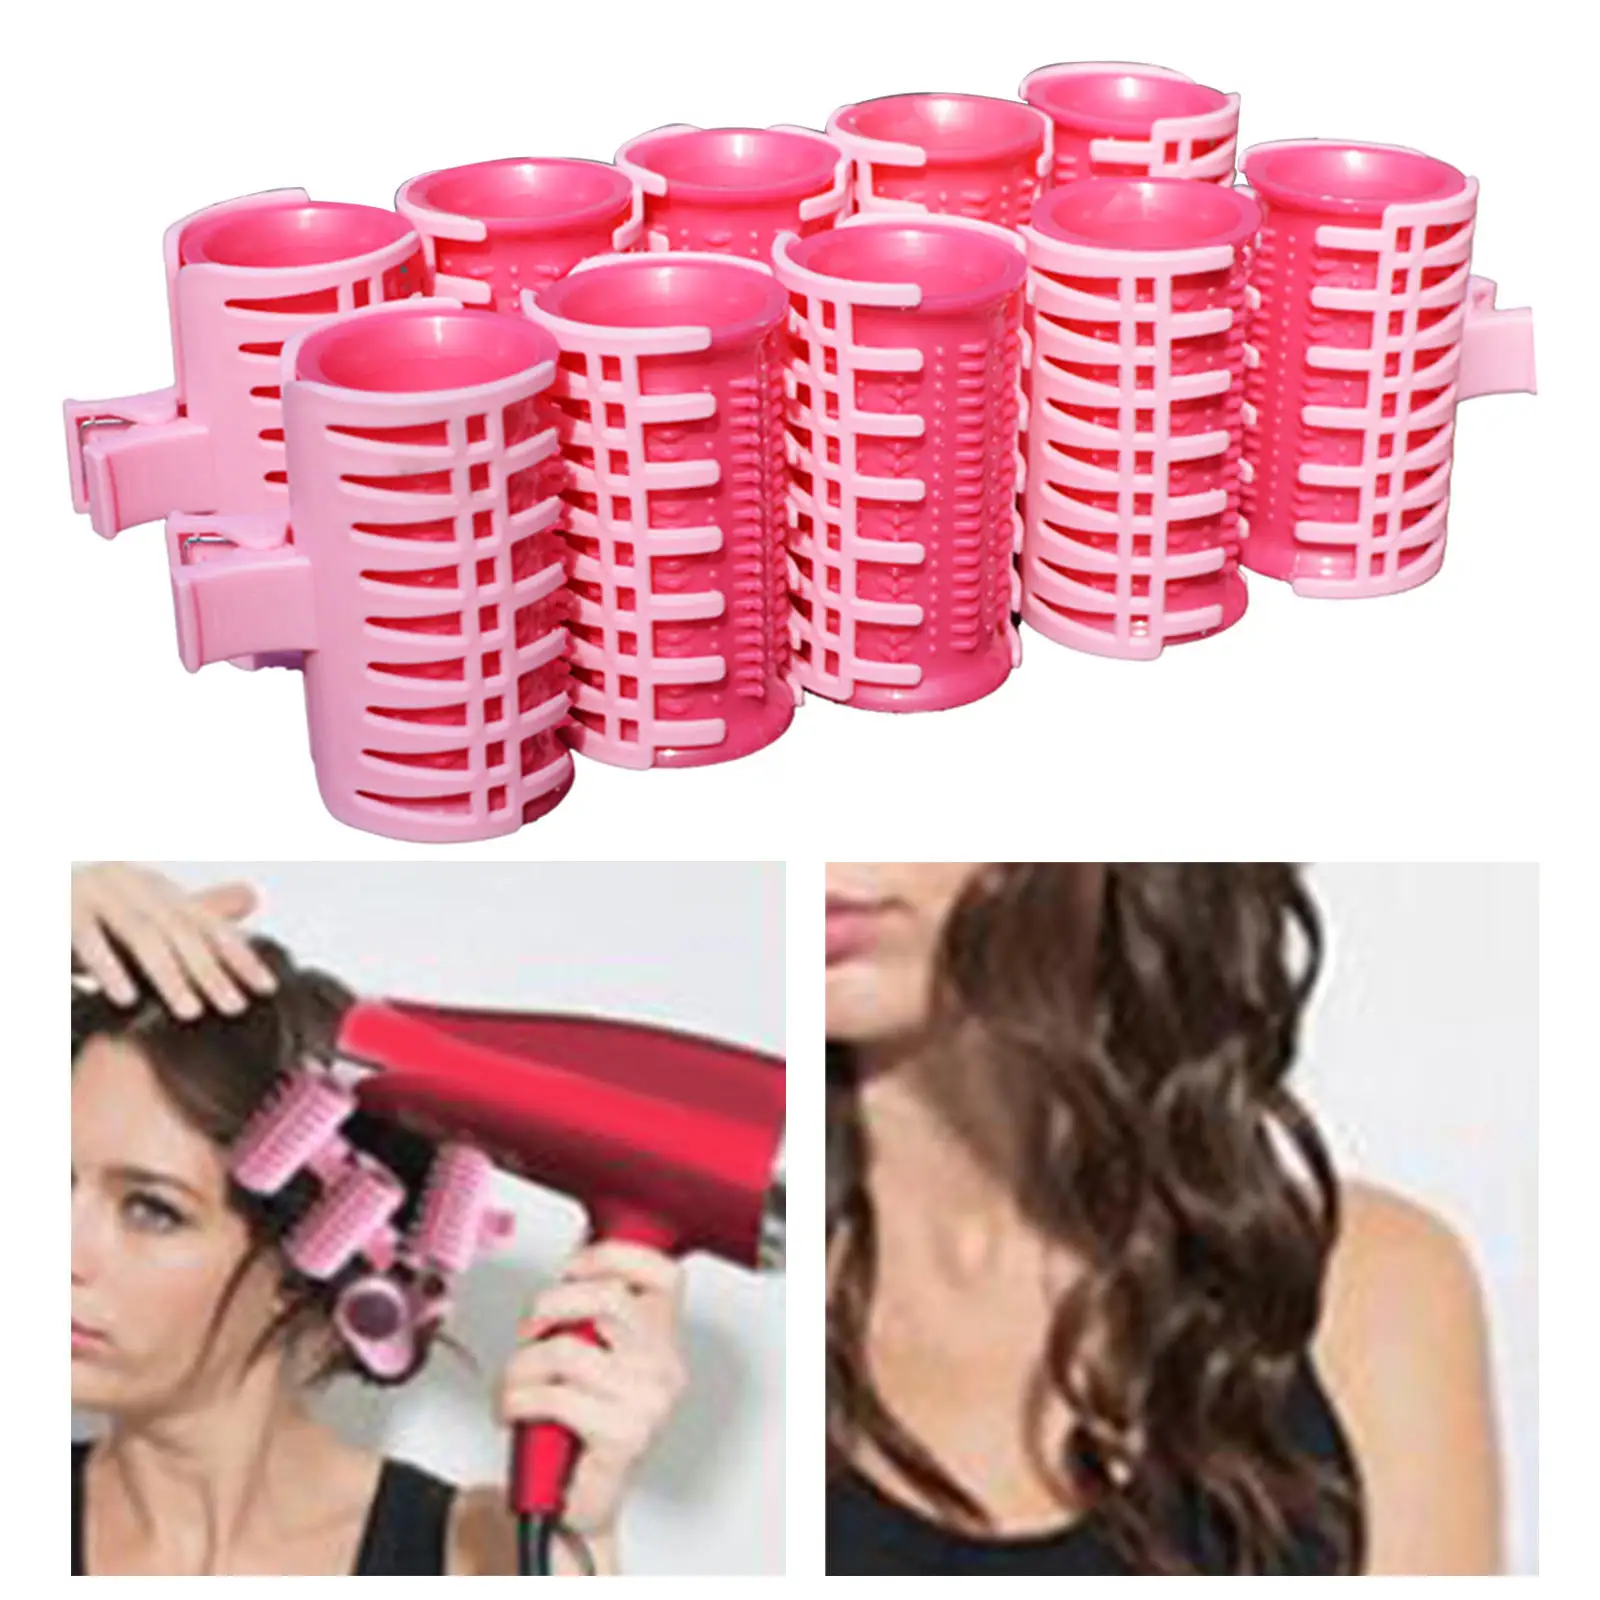 Roller Curlers Air Bangs Self Grip No Heat Candy Color Sticky Cling Set for Girl